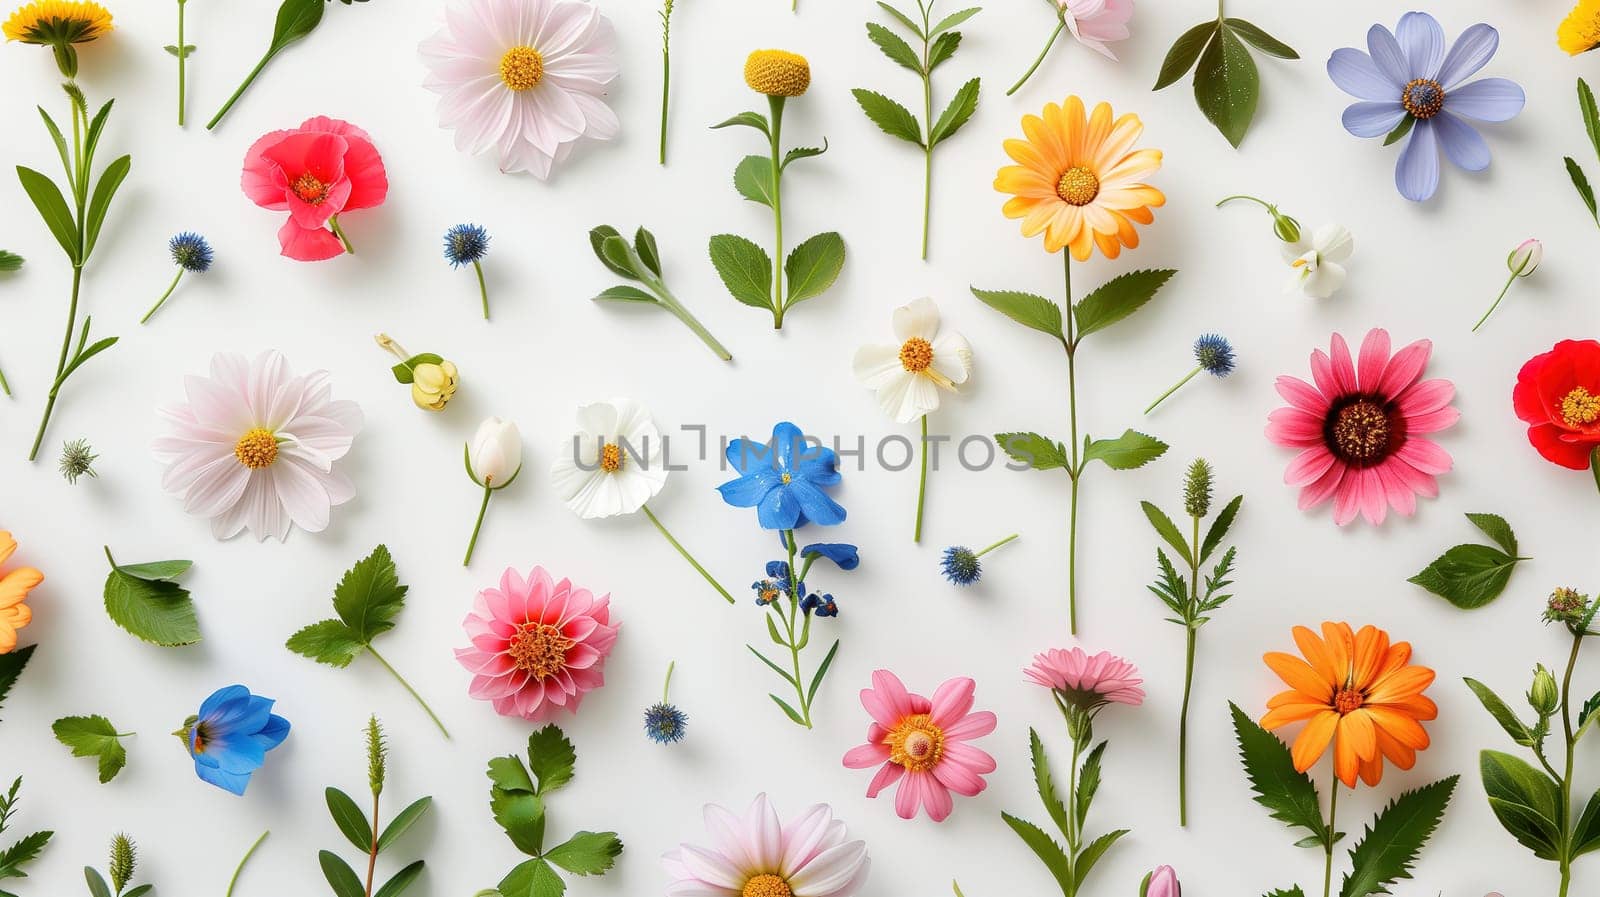 Vibrant Assortment of Flowers on White Surface by TRMK